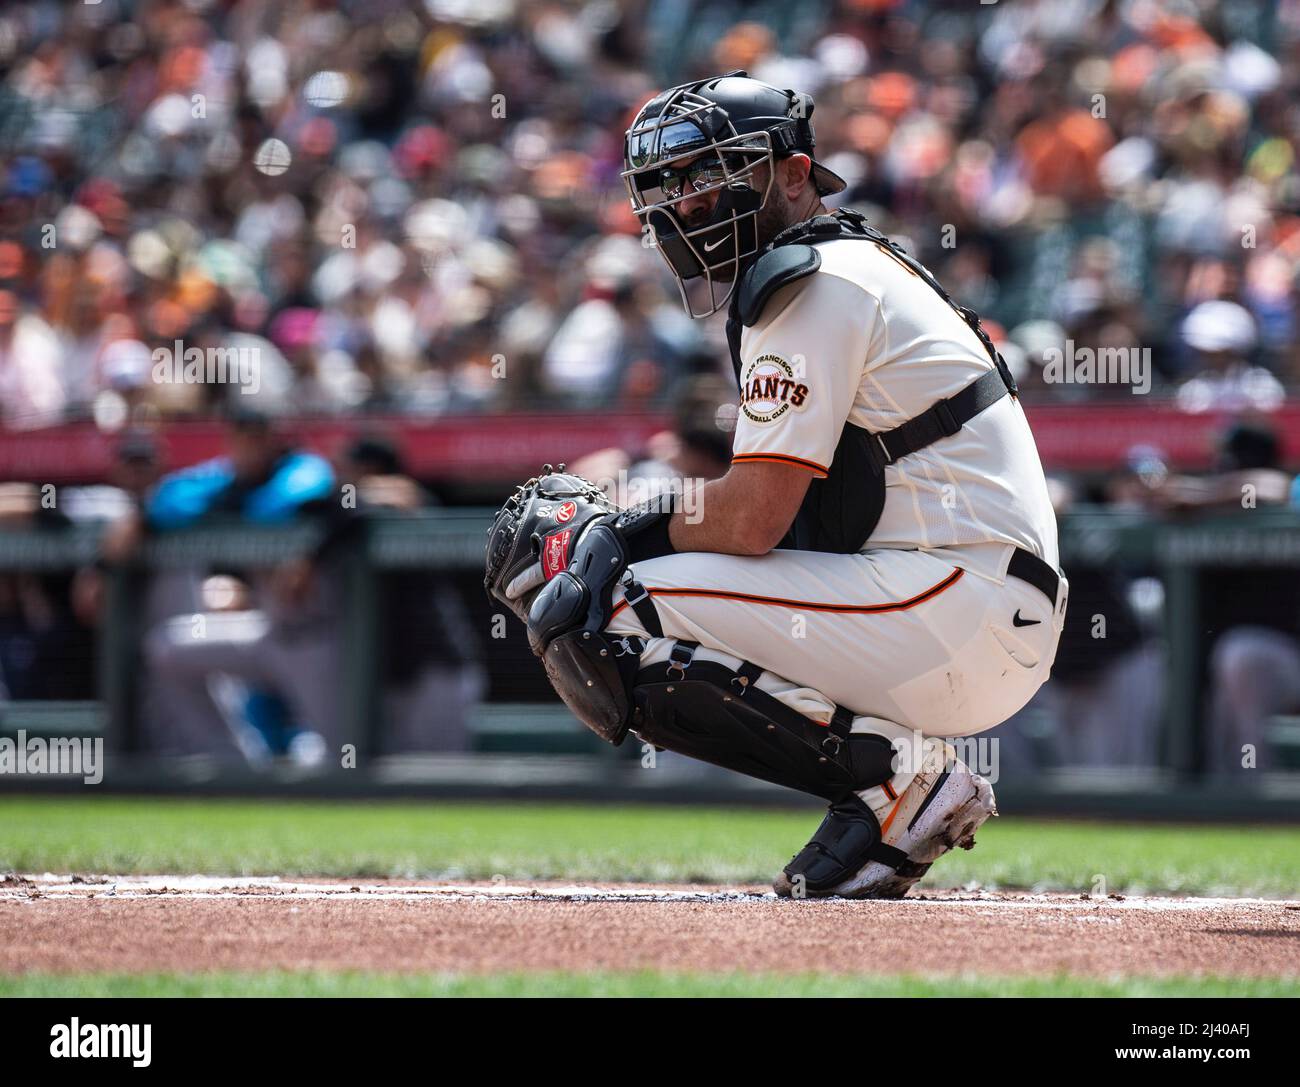 San Francisco, USA. April 10 2022 San Francisco CA, U.S.A. San Francisco catcher Curt Casali (2) looks to get signals from the dugout during MLB game between the Miami Marlins and the San Francisco Giants in game 3. The Giants beat the Marlins 3-2 at Oracle Park San Francisco Calif. Thurman James/CSM Credit: Cal Sport Media/Alamy Live News Stock Photo